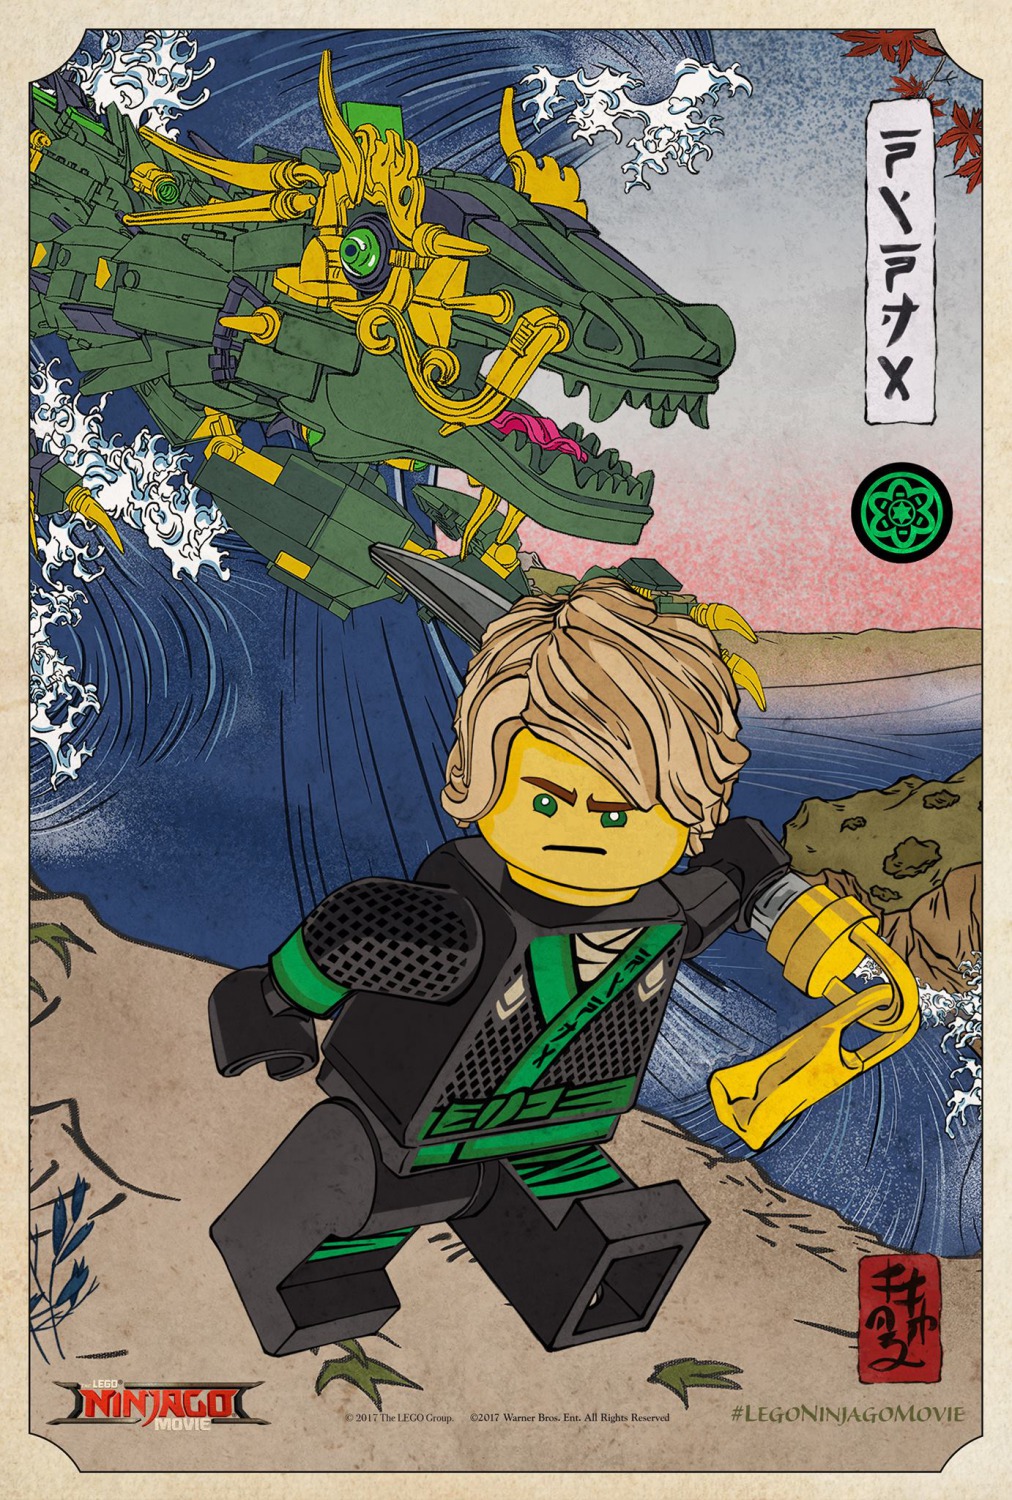 Extra Large Movie Poster Image for The Lego Ninjago Movie (#22 of 36)